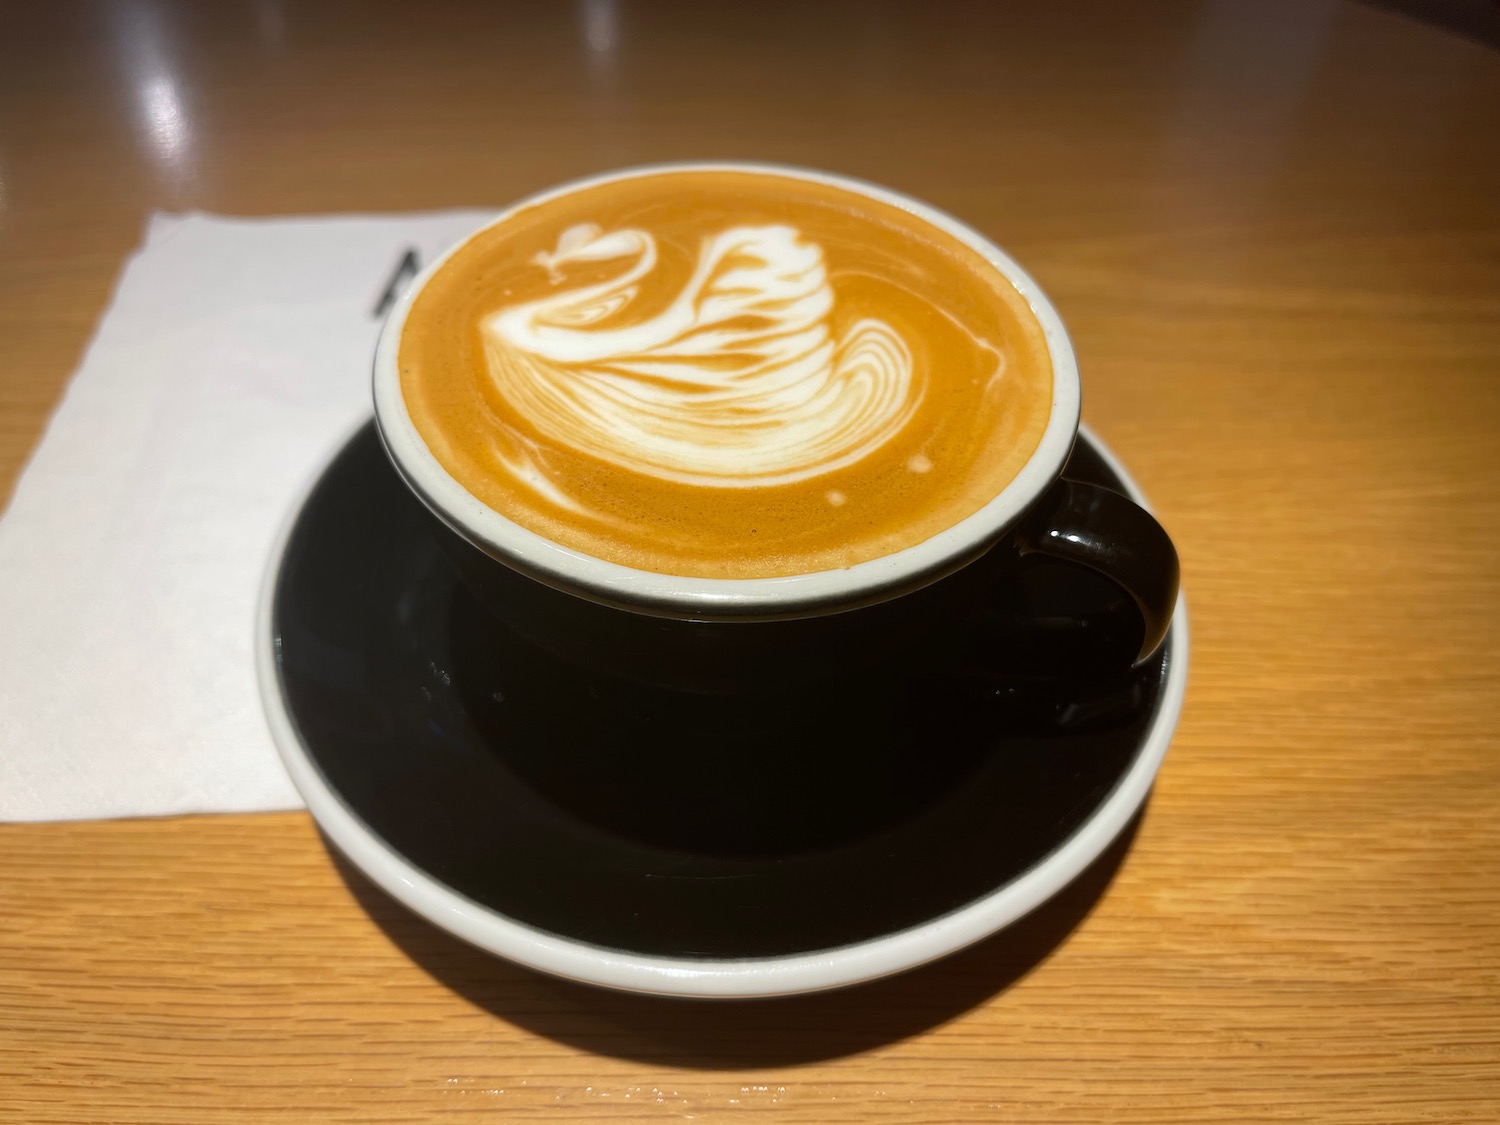 a cup of coffee with a swan design on top